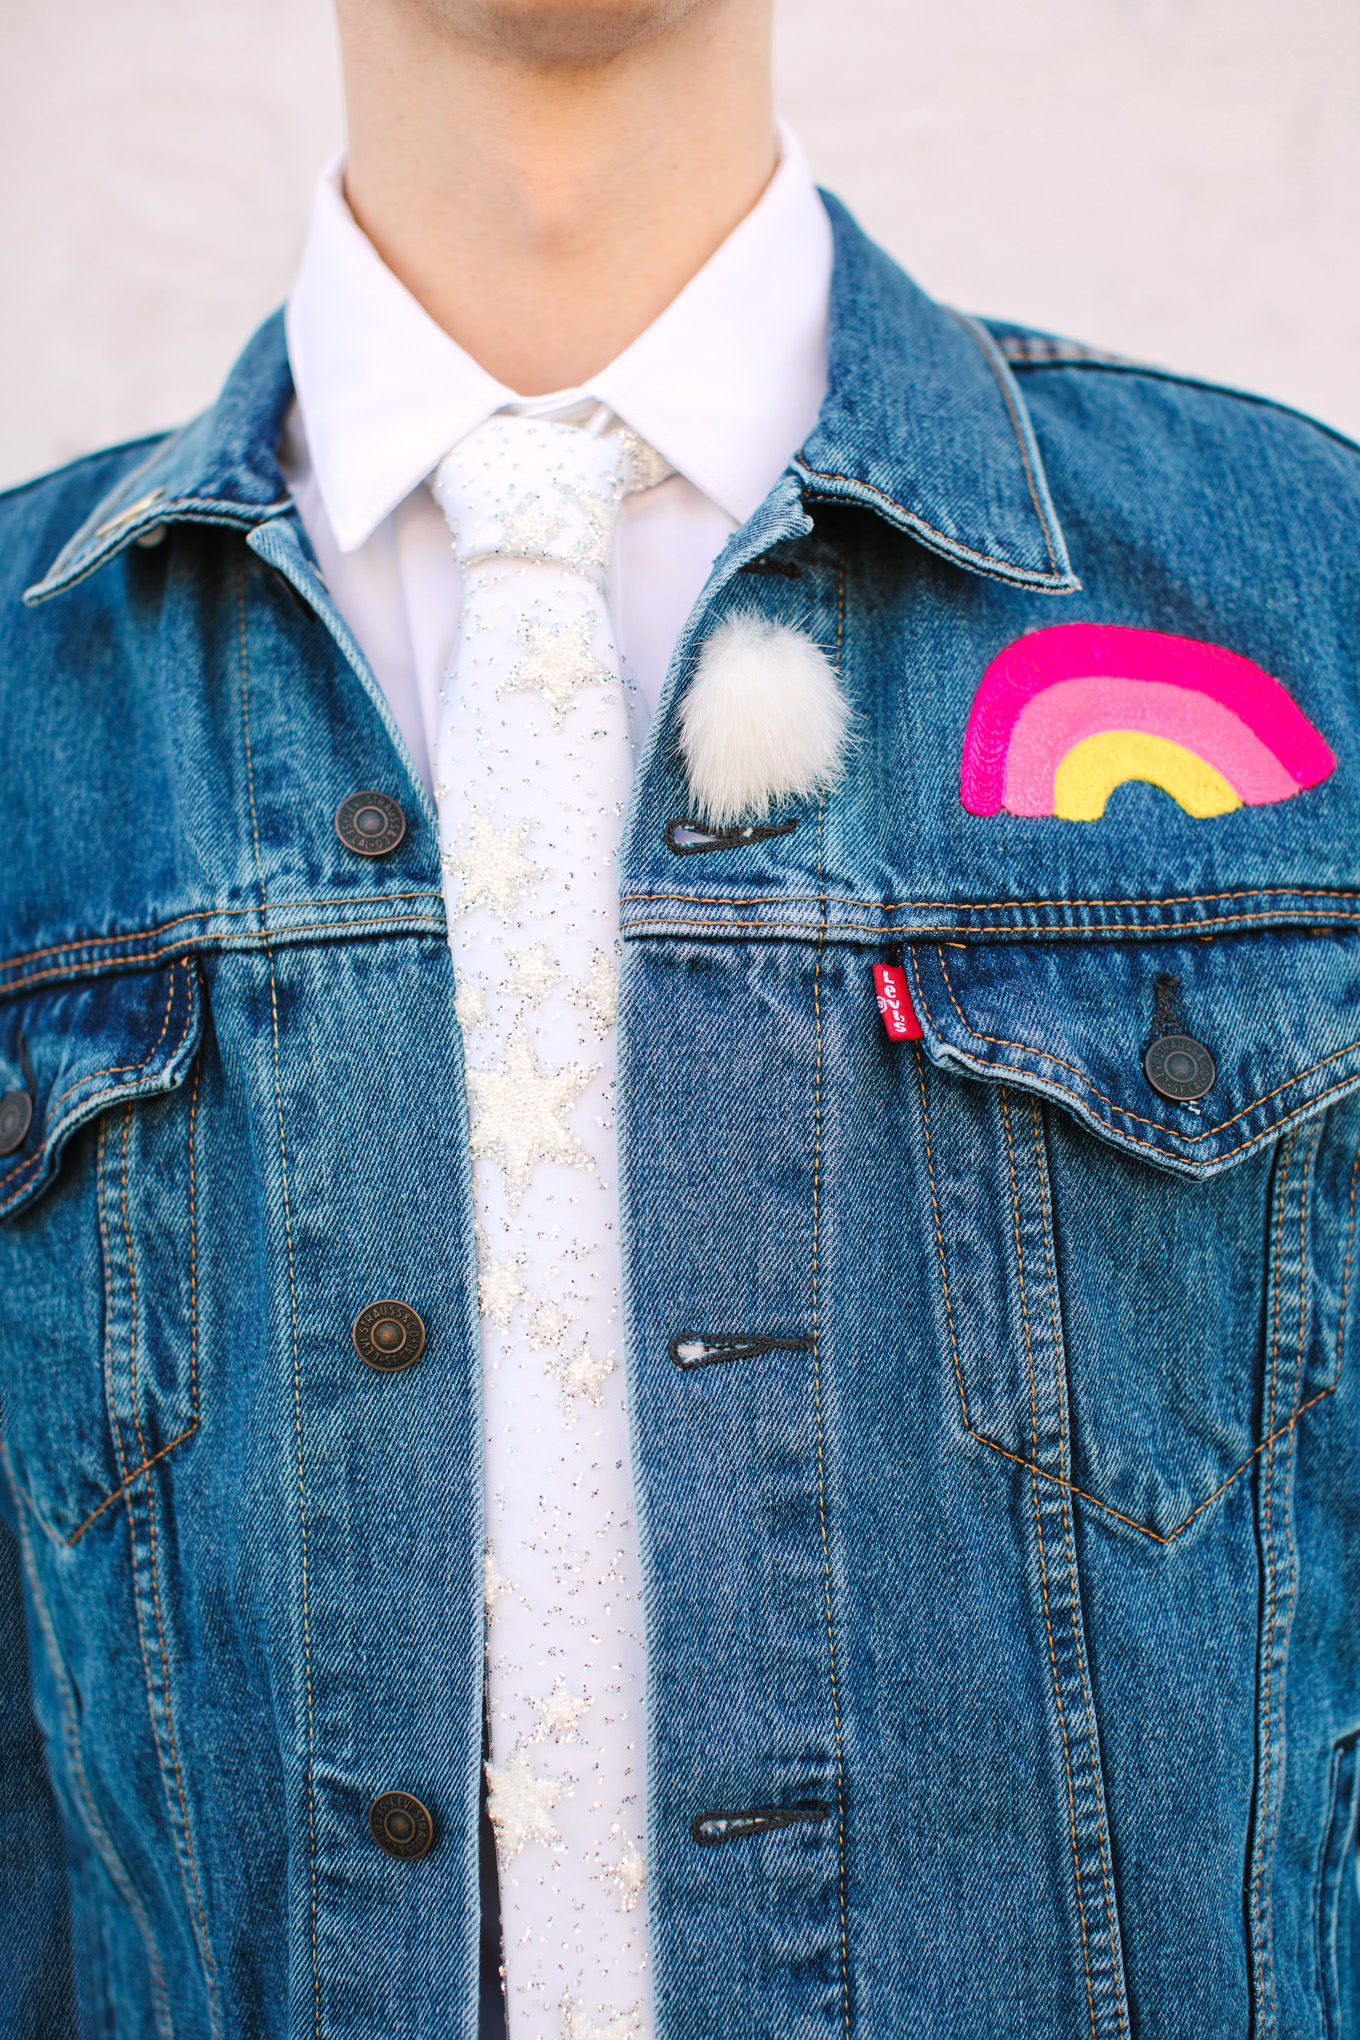 Custom denim jacket for groom | Colorful wedding at The Unique Space Los Angeles published in The Knot Magazine | Fresh and colorful photography for fun-loving couples in Southern California | #colorfulwedding #losangeleswedding #weddingphotography #uniquespace Source: Mary Costa Photography | Los Angeles